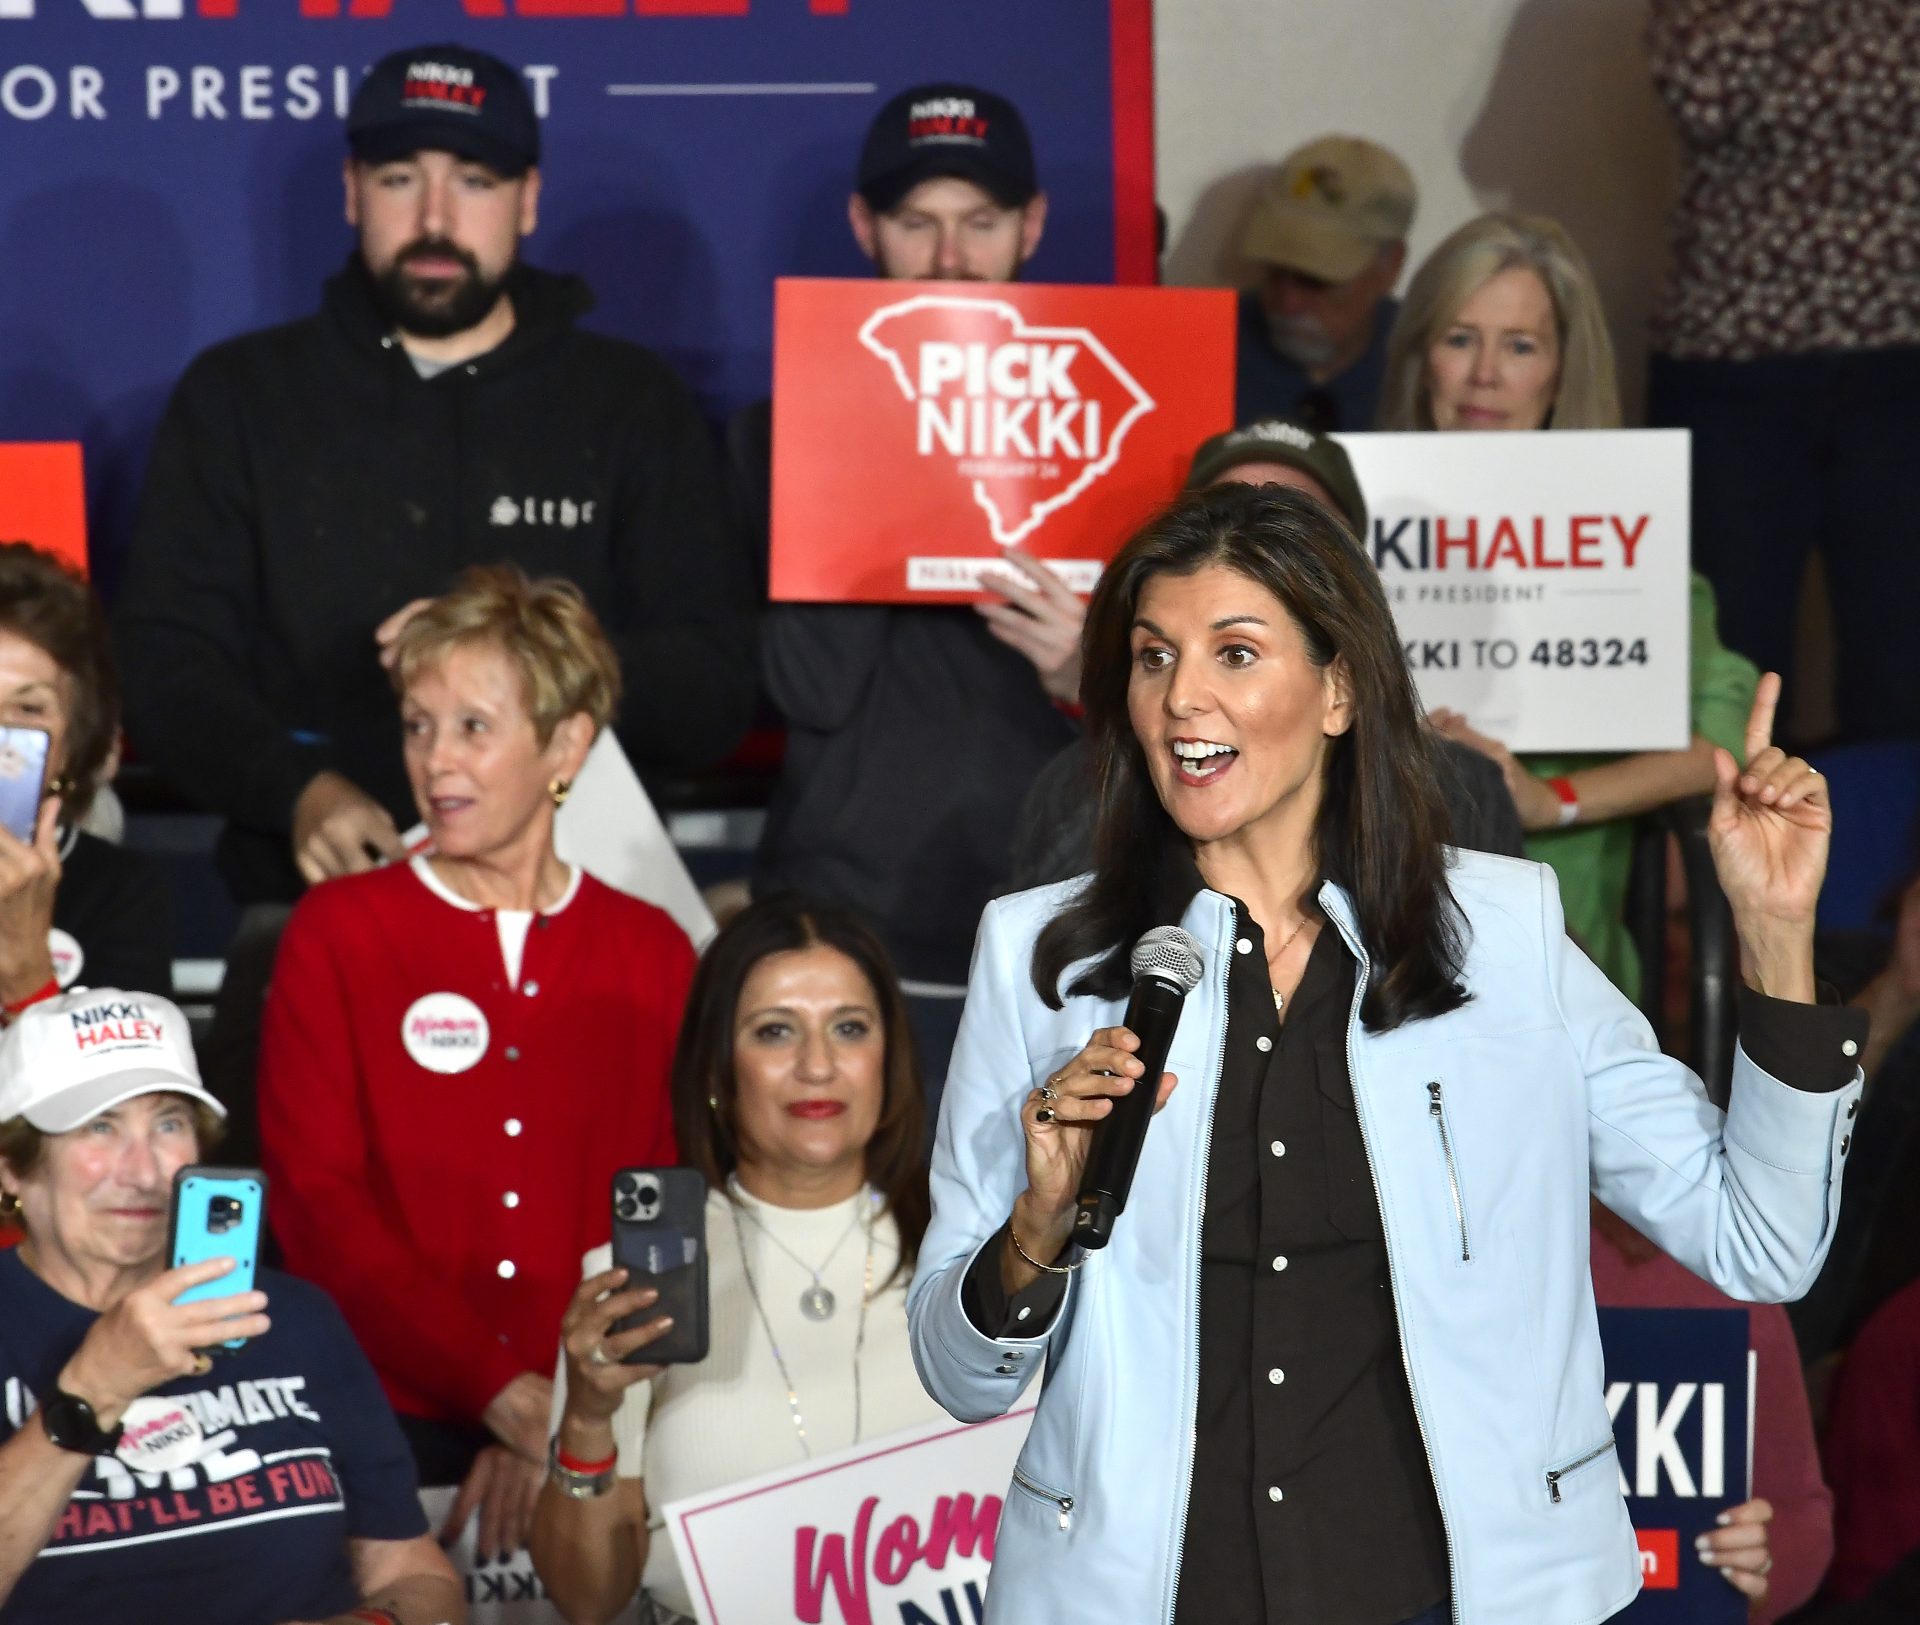 Former Republican Governor of South Carolina Nikki Haley address a standing-room-only crowd during her campaign stop at the University of South Carolina Beaufort Recreation Center on Monday, Nov. 27. Bob Sofaly/The Island News